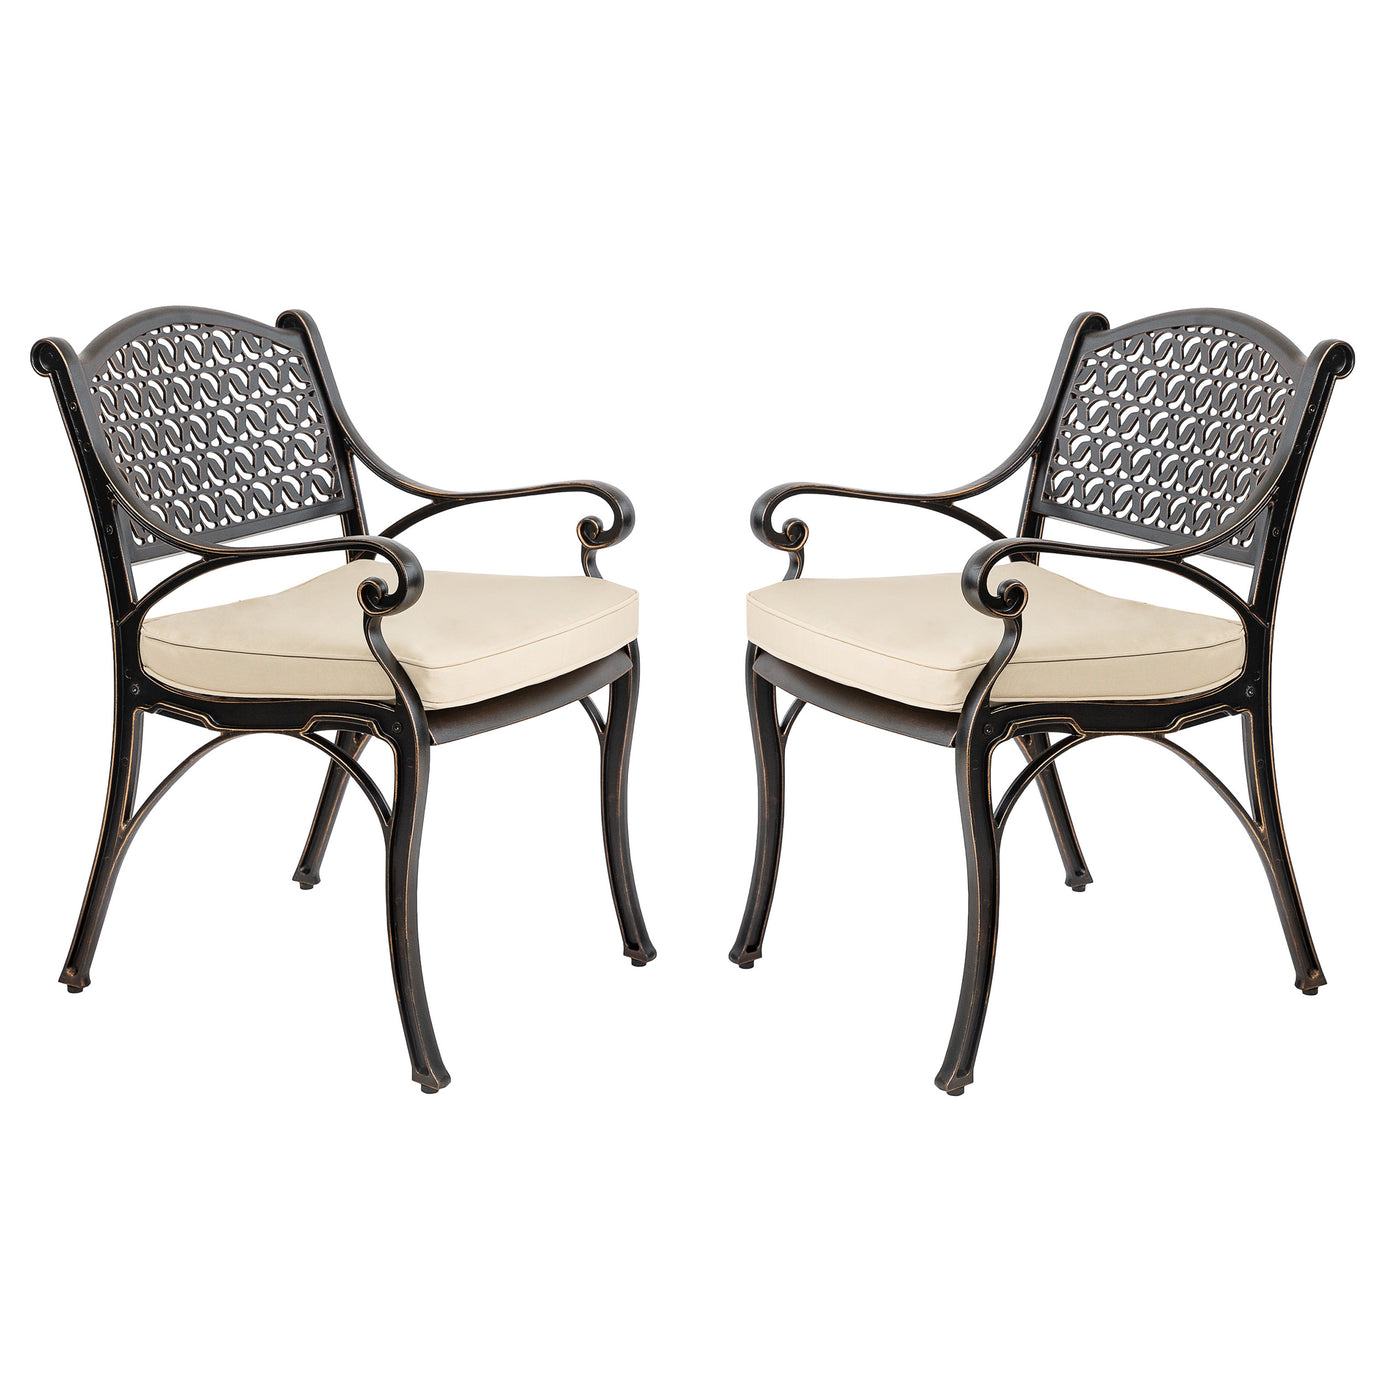 Harmon 2-Piece Outdoor Dining Chair Set for Patio